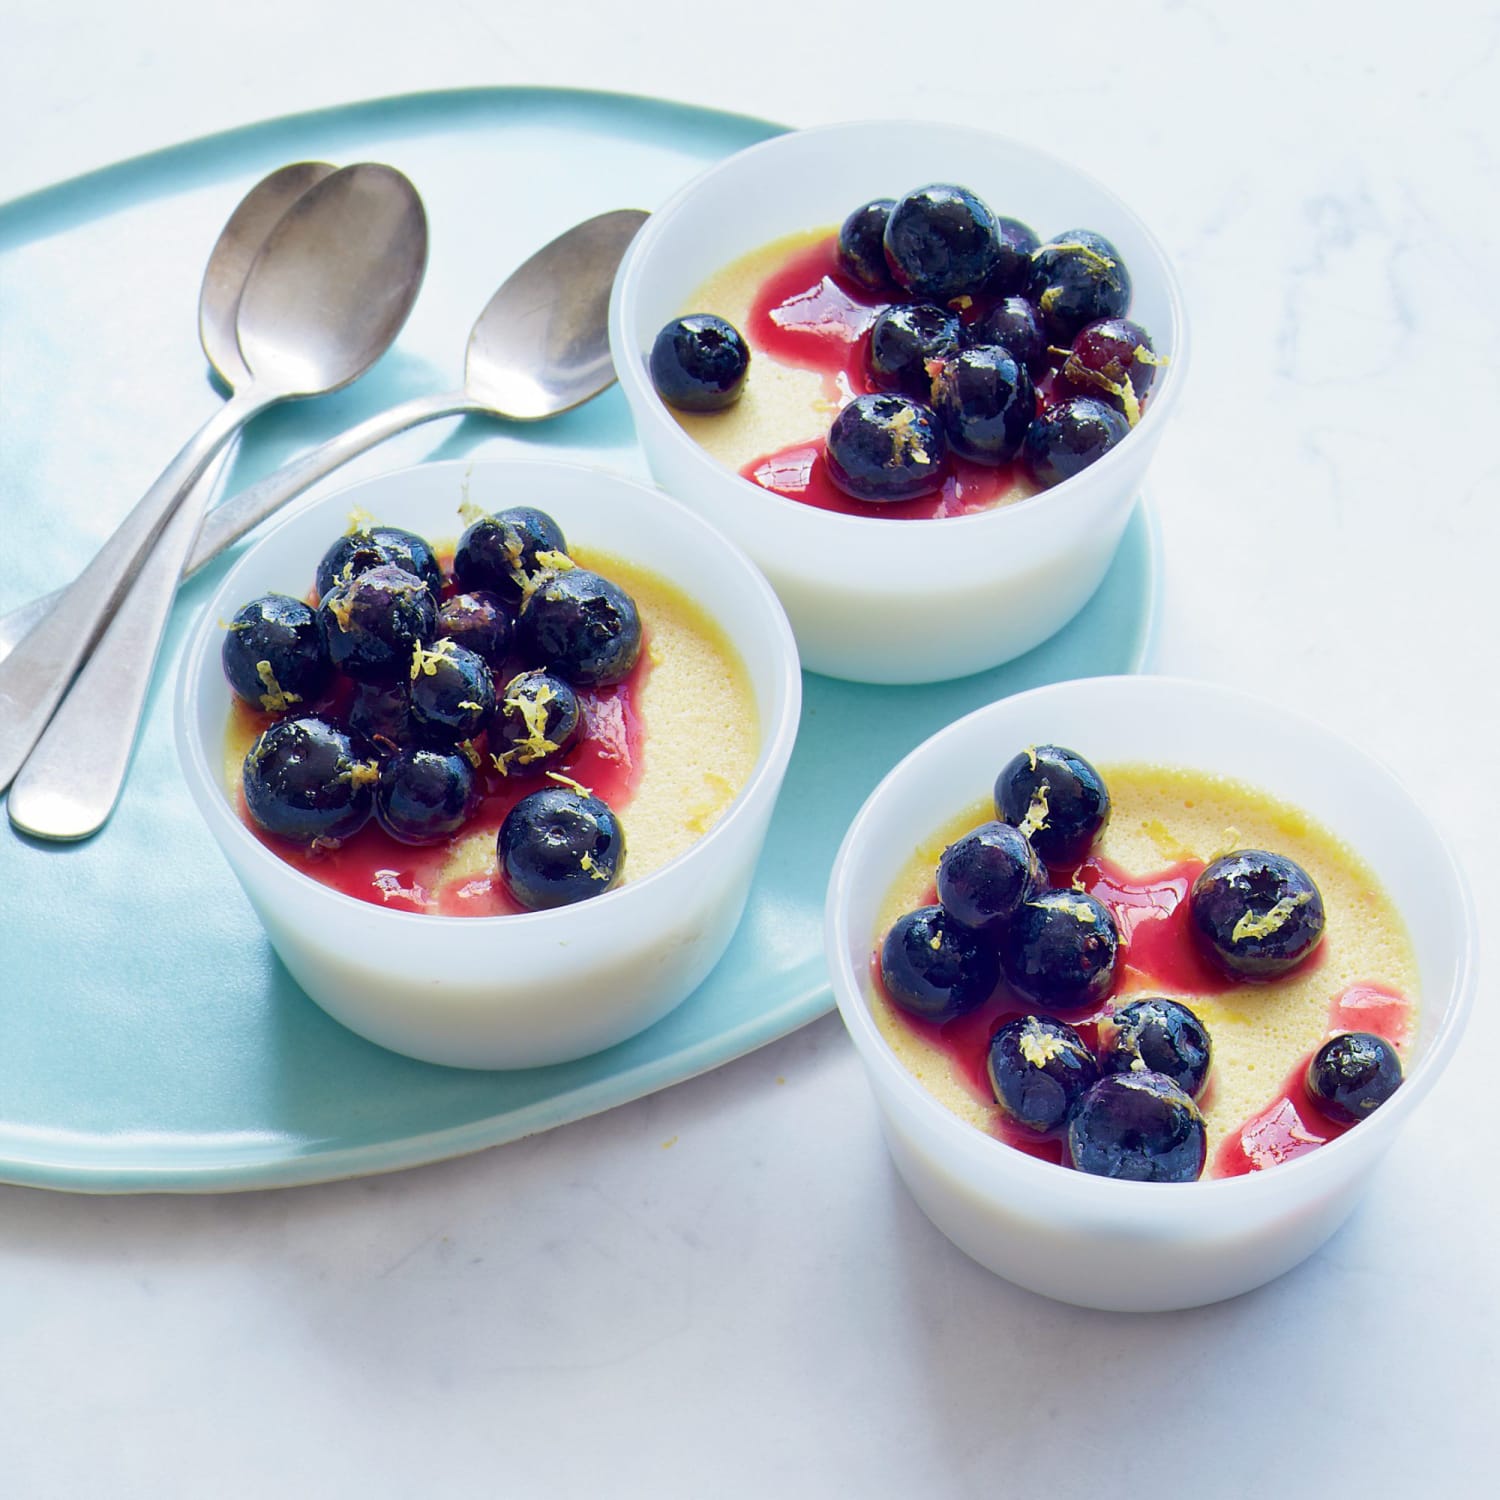 Sweet Corn Panna Cotta with Fresh Blueberry Compote Recipe